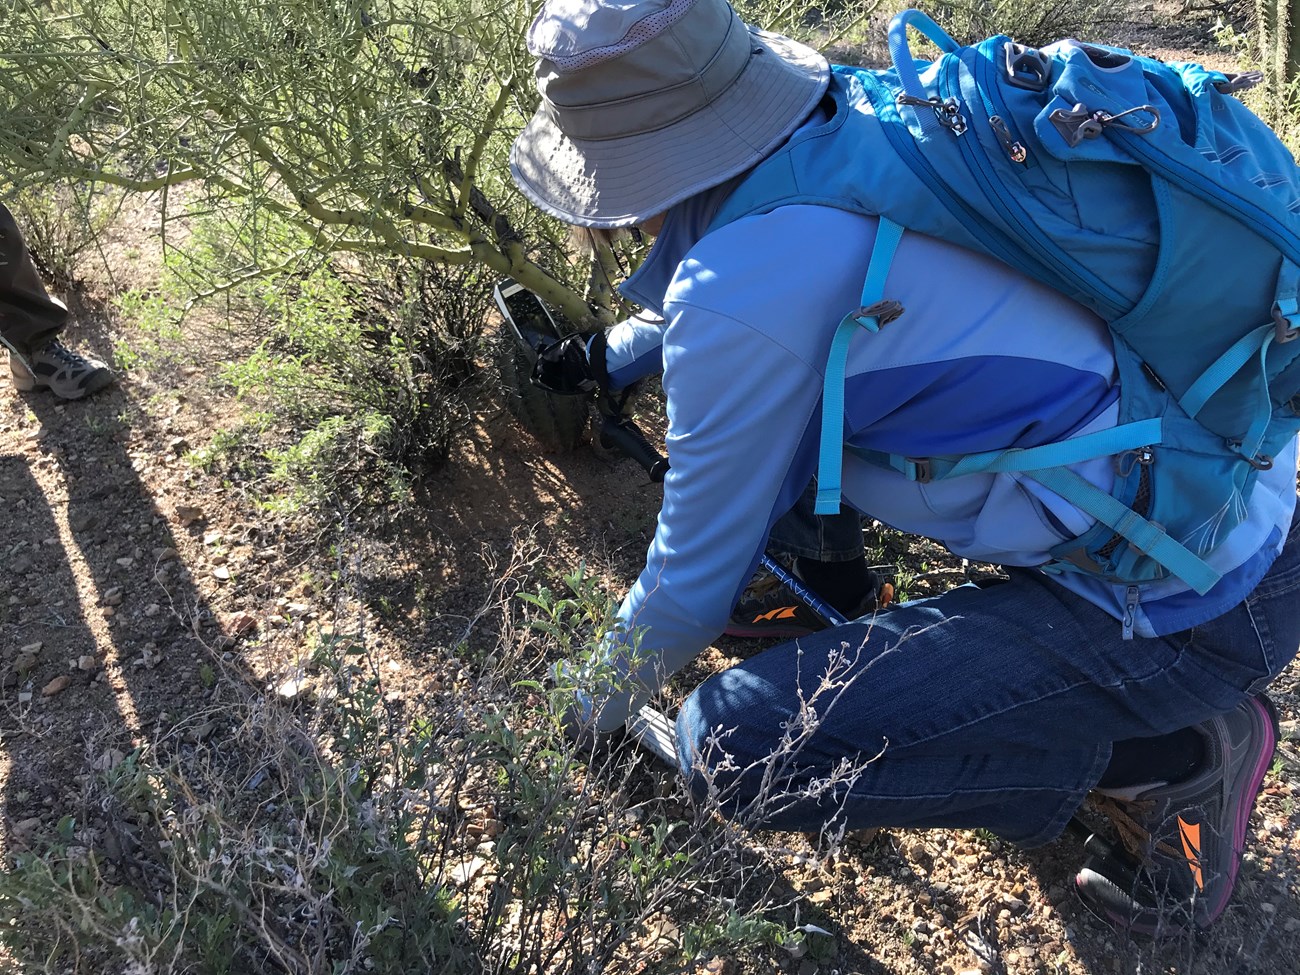 Volunteer crouches through vegetation to collect GPS data on small saguaro